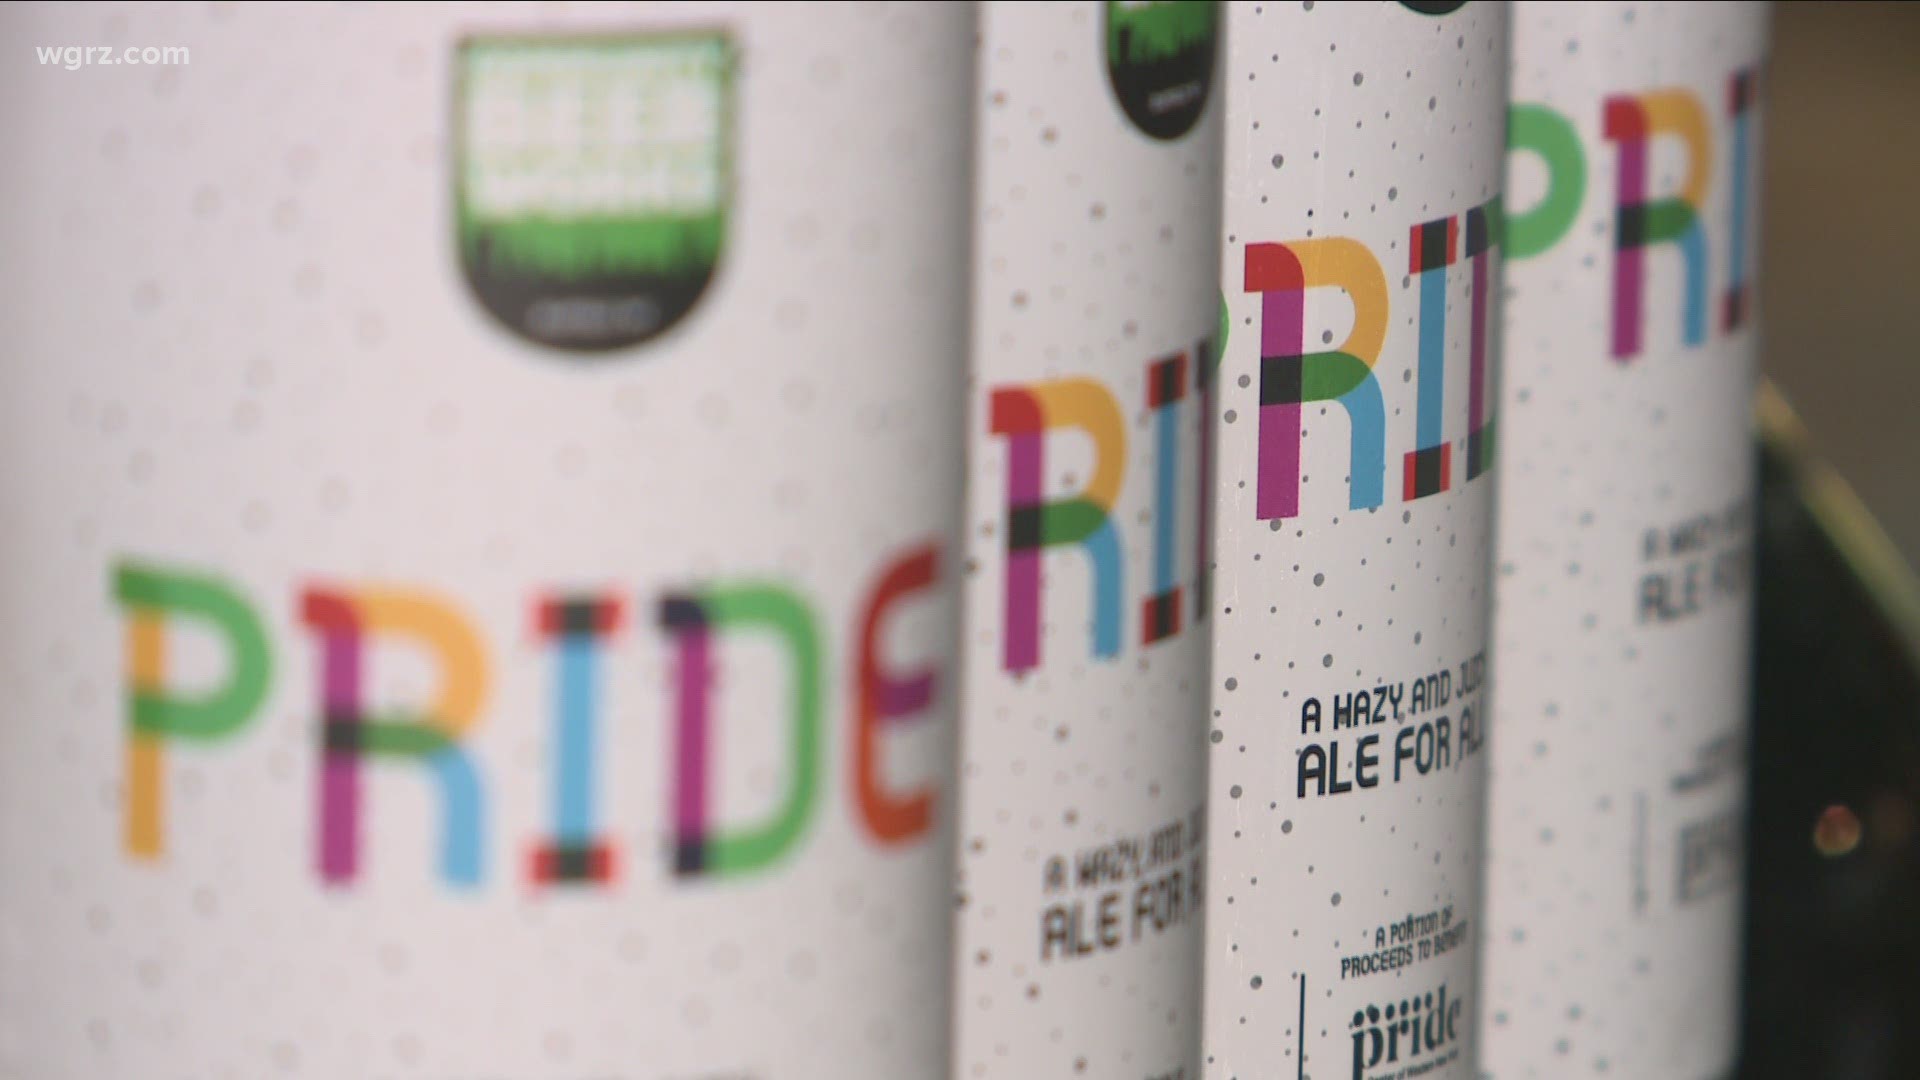 A local brewery is working to support buffalo's LGBTQ community with the release of a new beer simply called Pride.